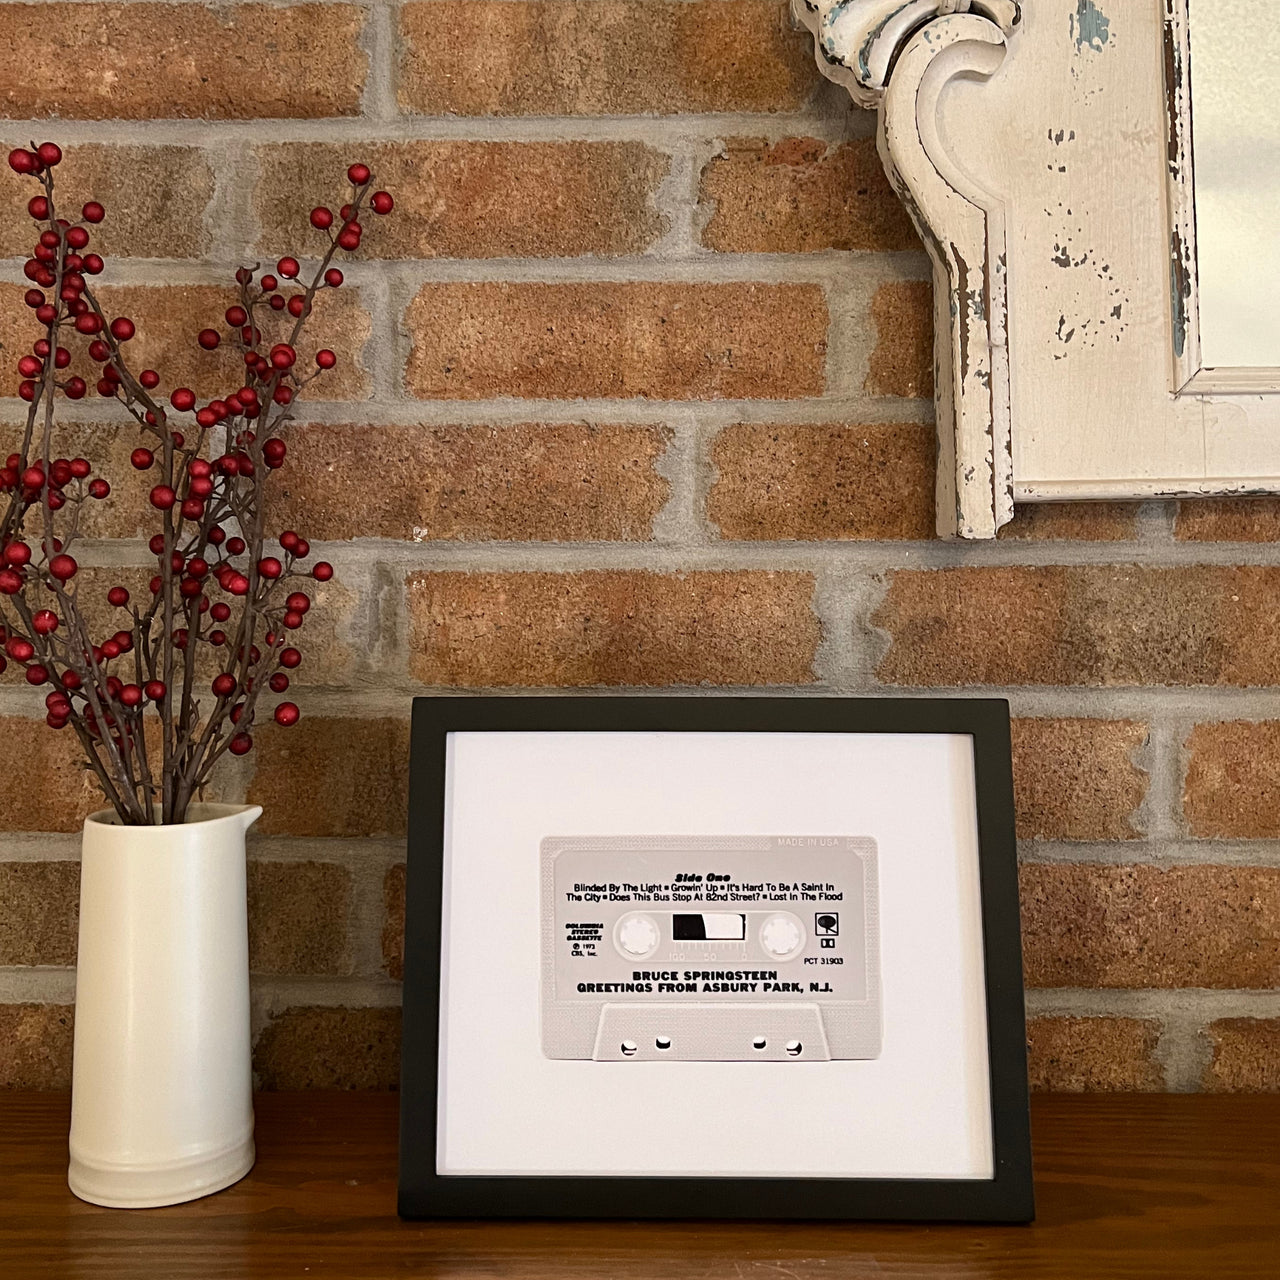 Modern art photo of the cassette of "Bruce Springsteen Greetings from Asbury Park, N.J." displayed in your home